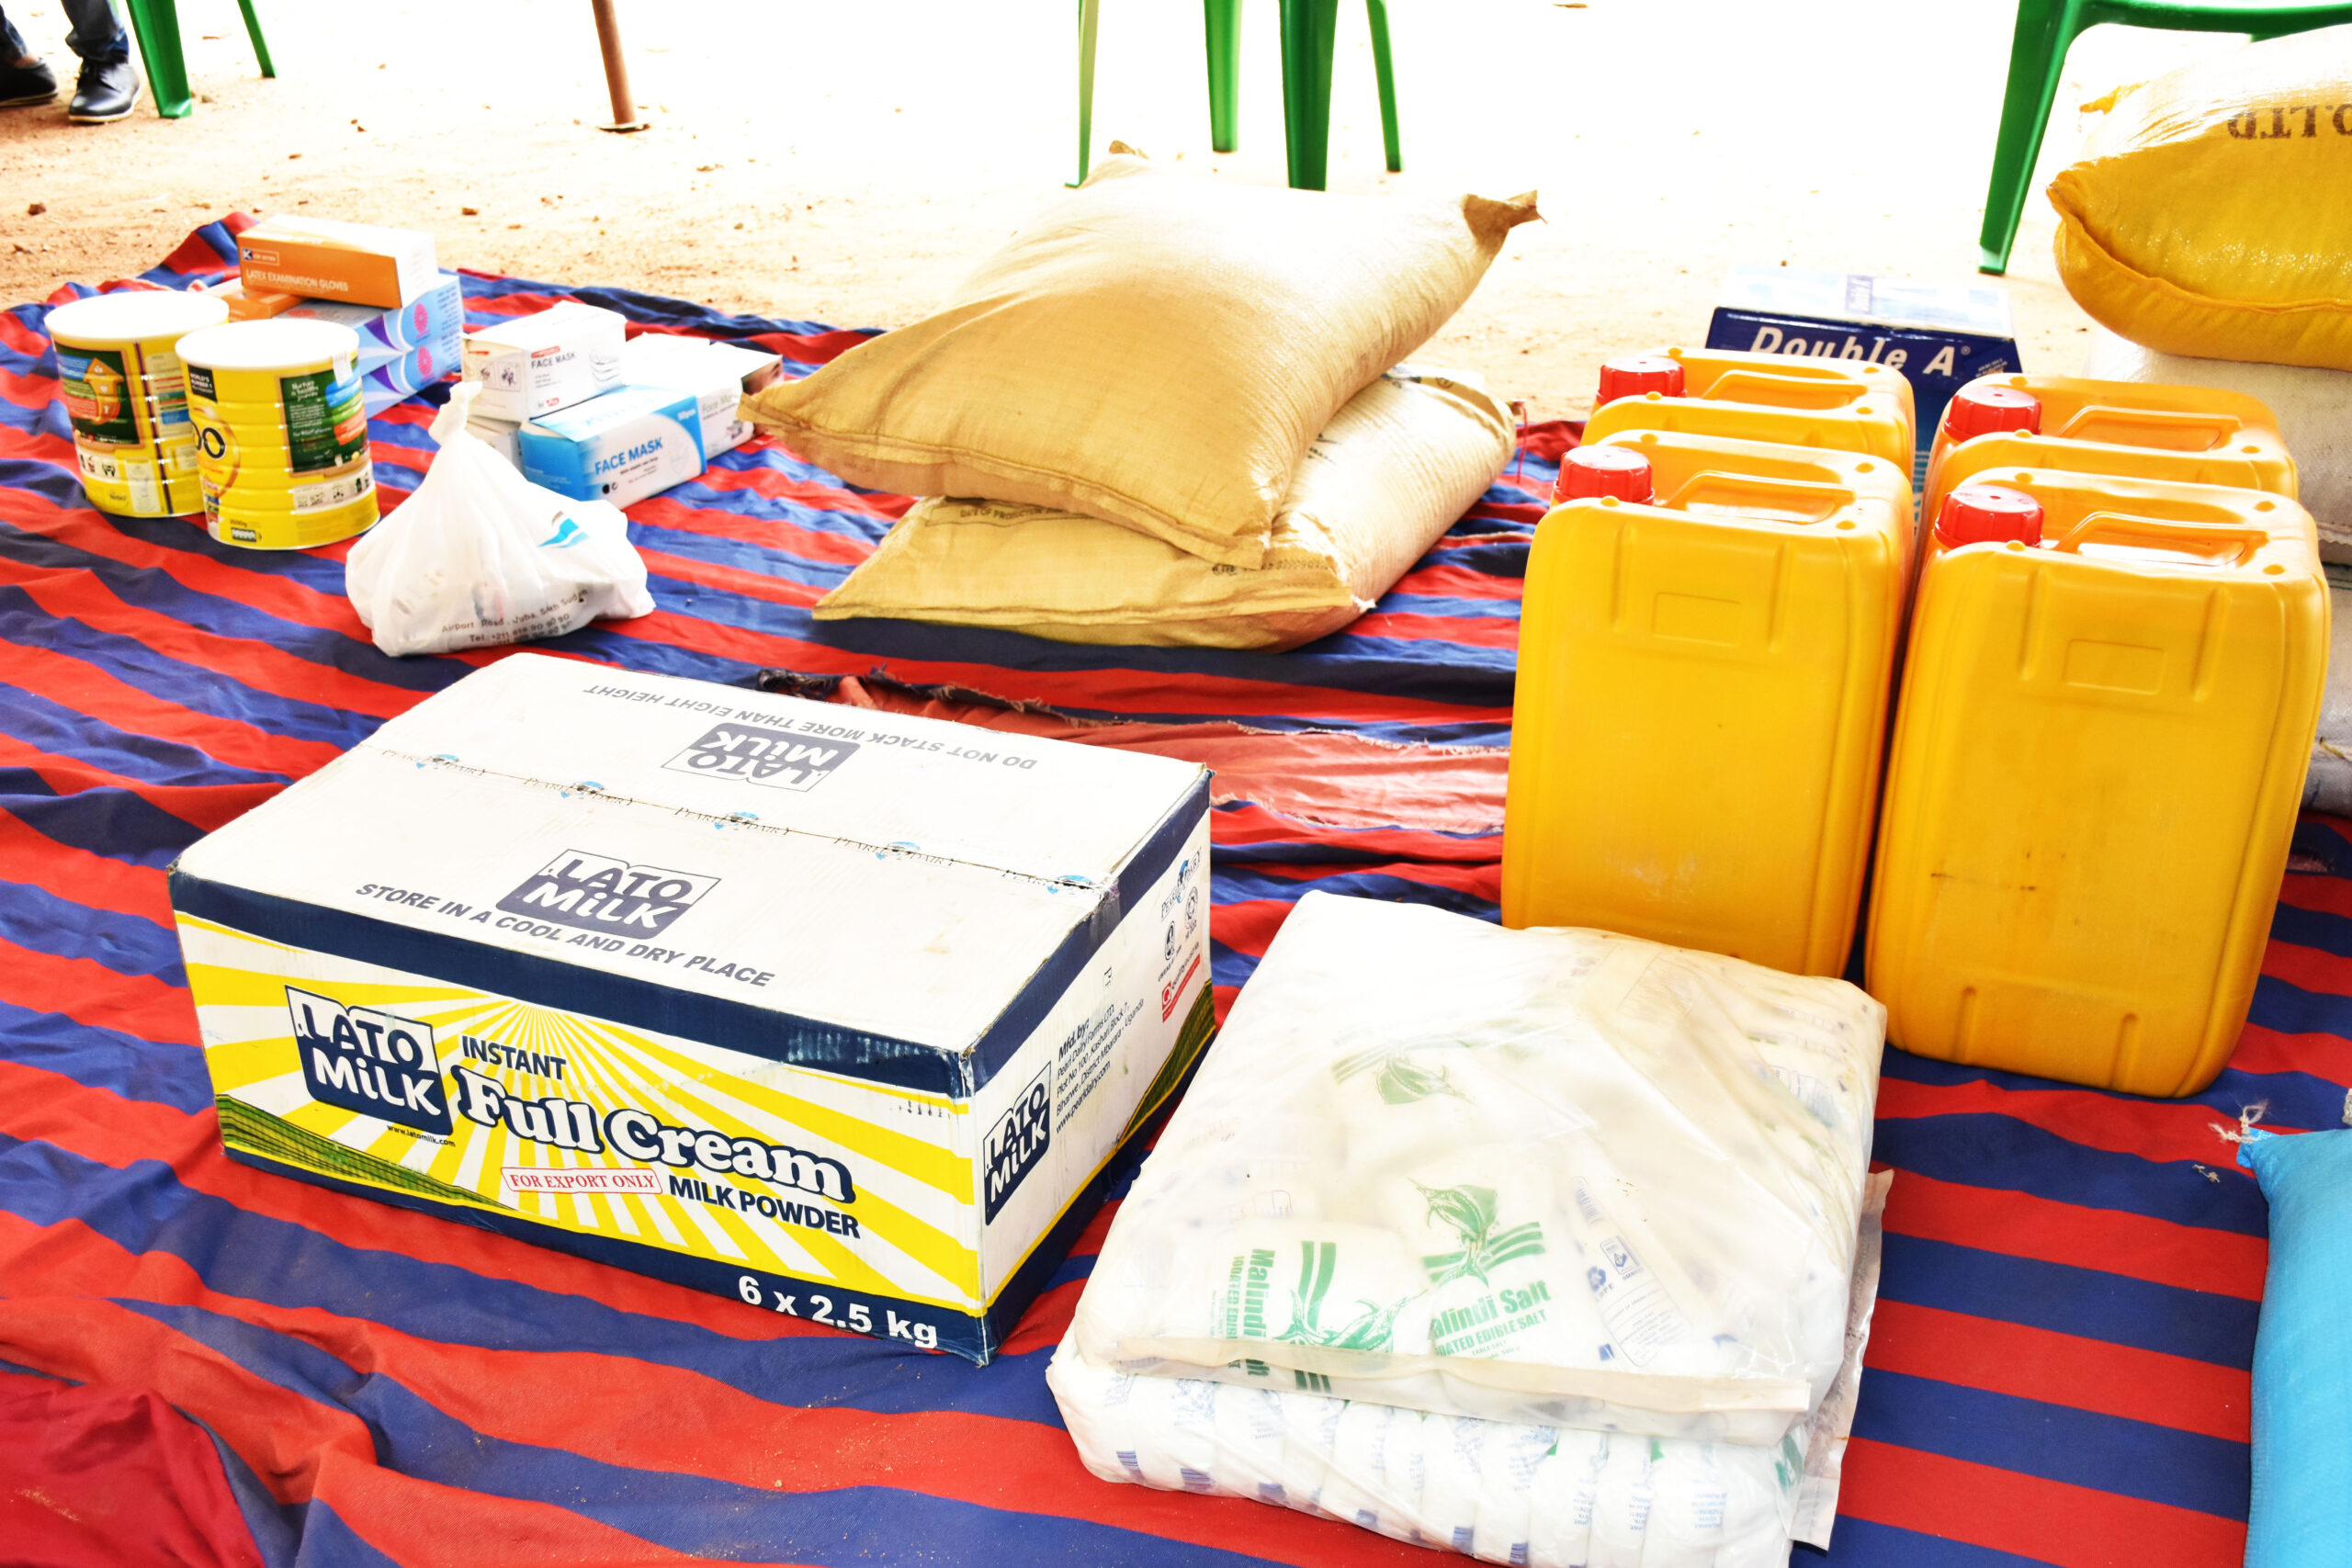 Over 900 teachers get food relief package from Germany